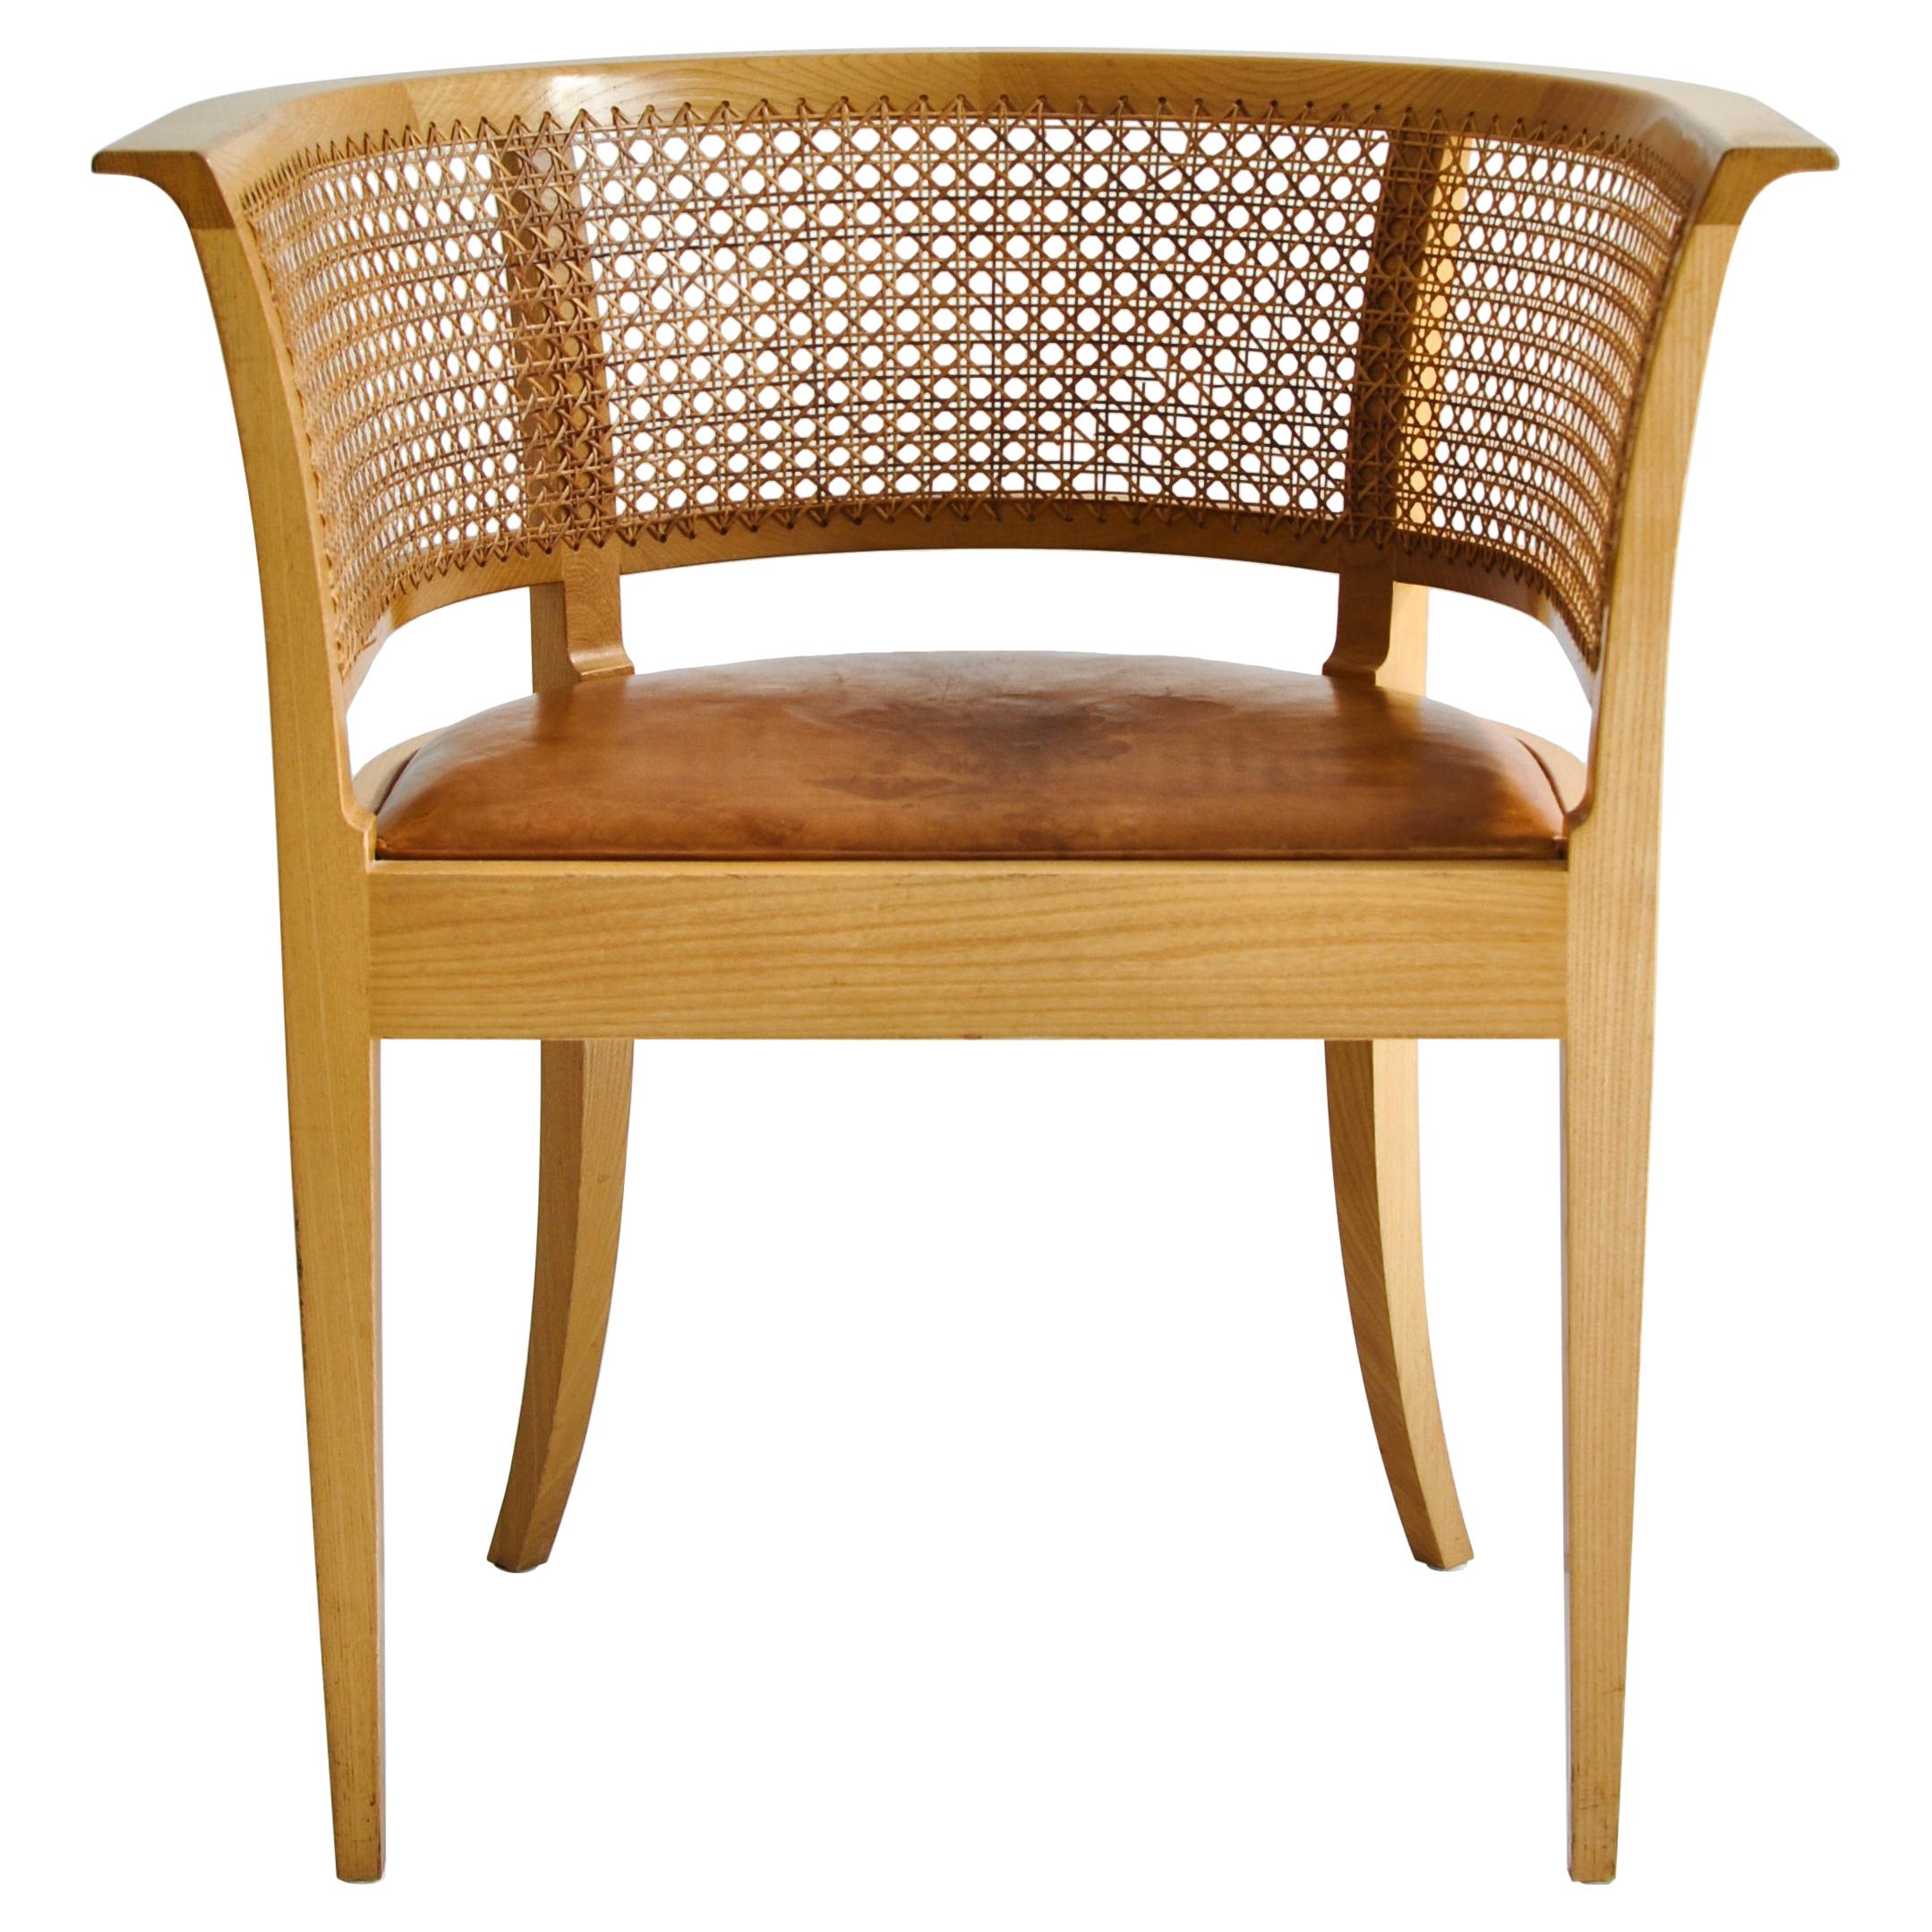 Kaare Klint "Faaborg" Arm Chair in Elm & Leather Made at Rud Rasmussen, 1970s